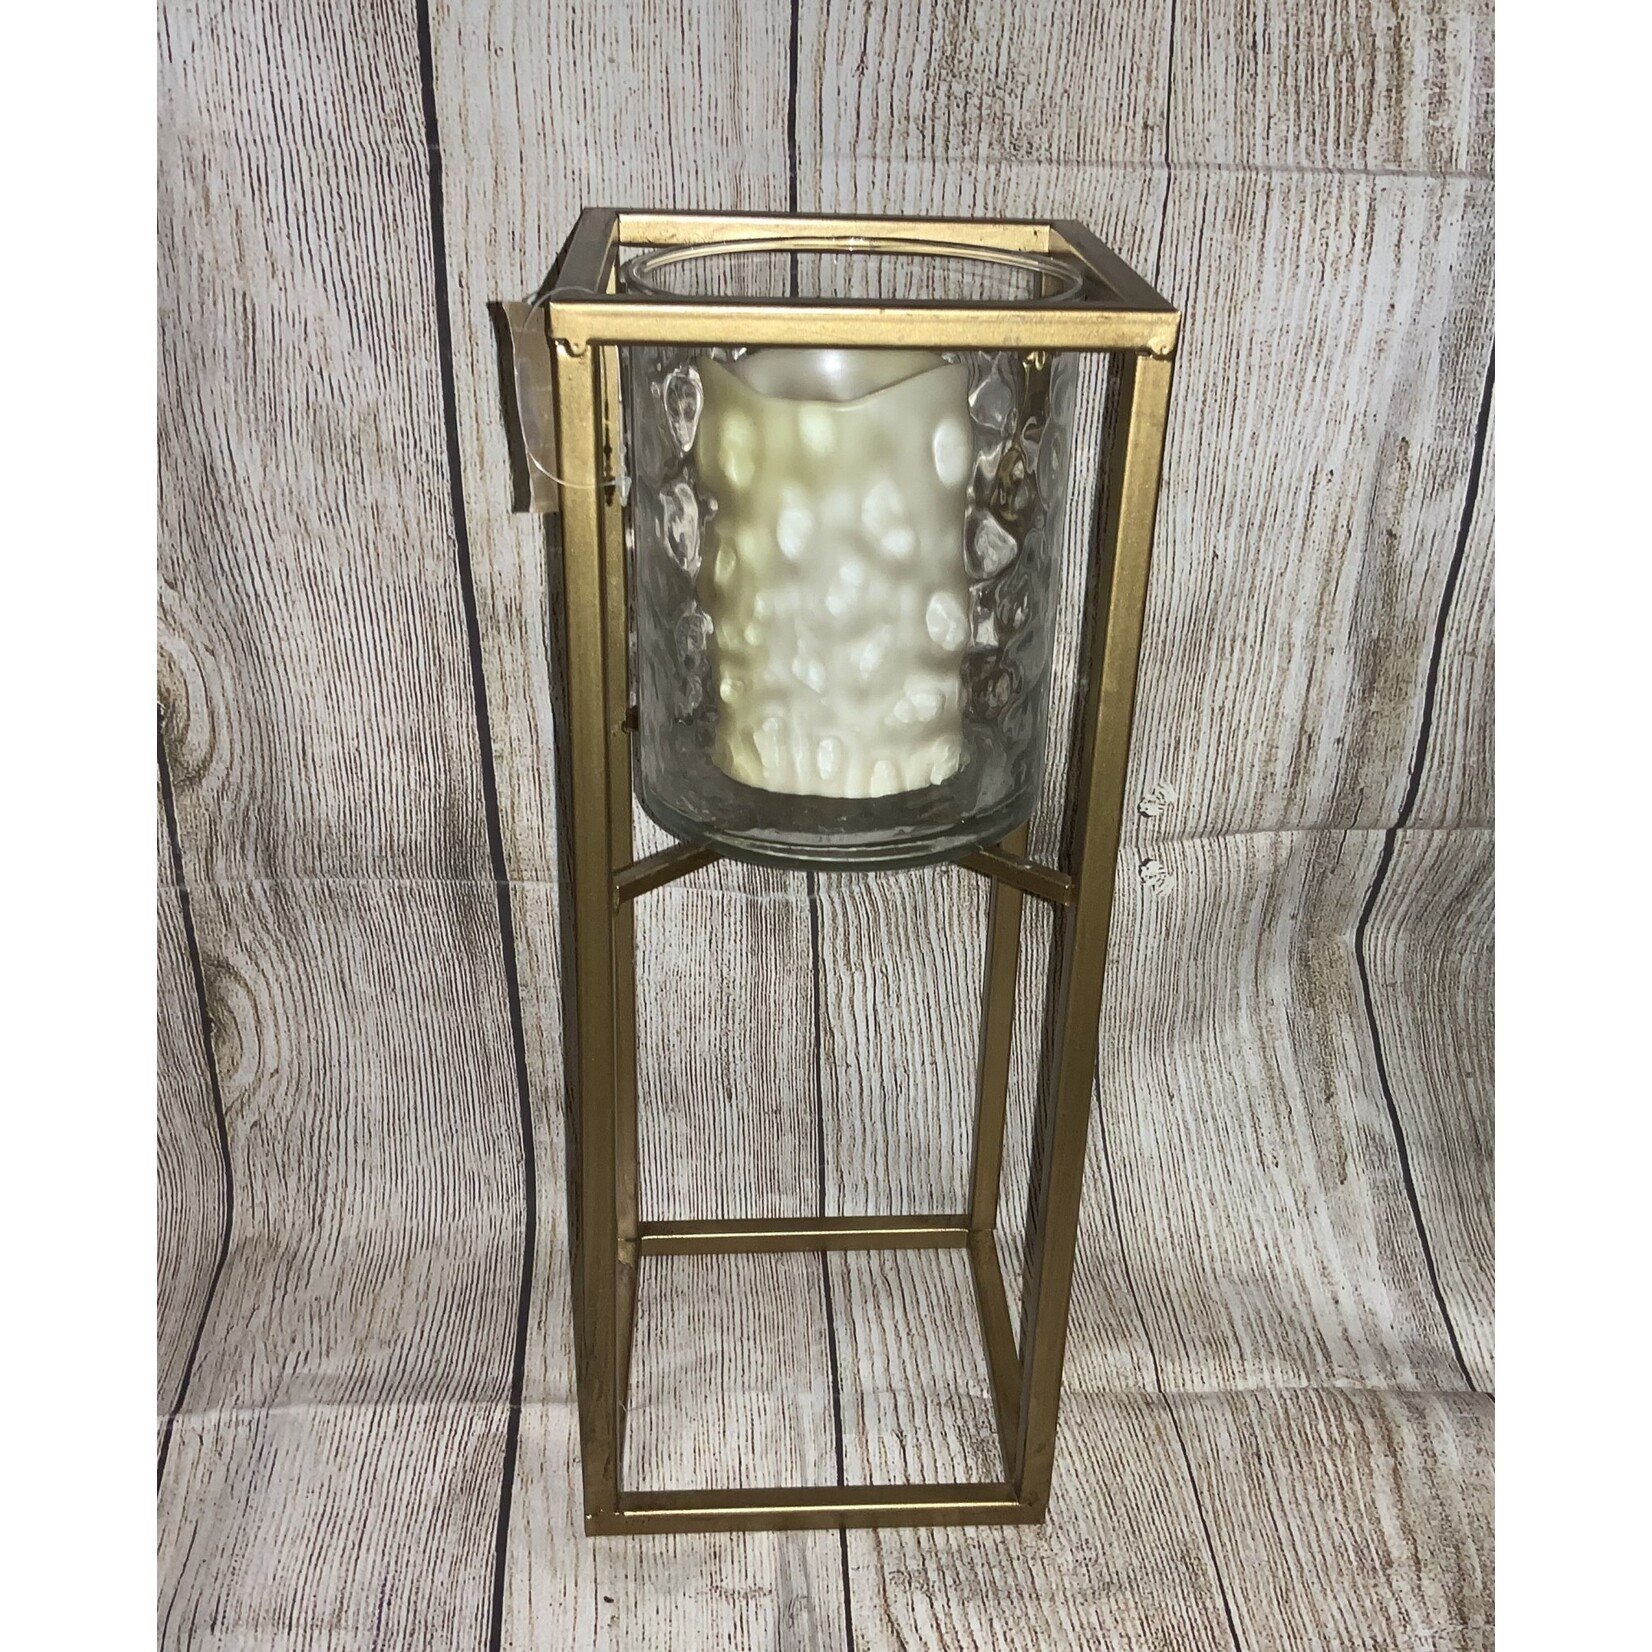 Gift Essentials Metal Candle Holder w/Glass Large